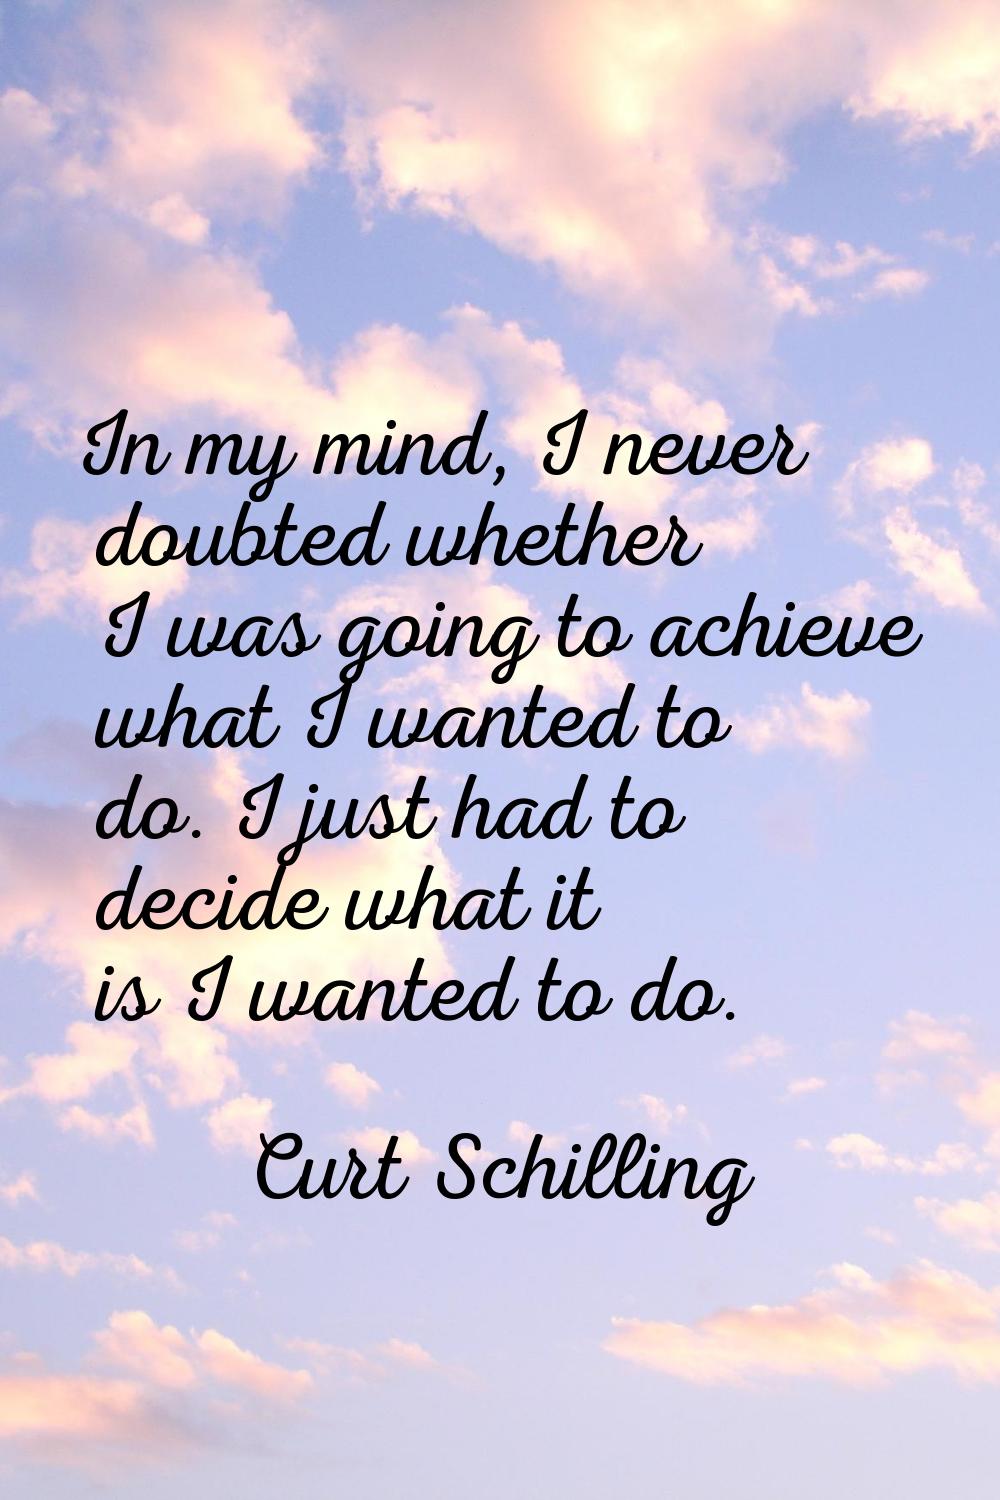 In my mind, I never doubted whether I was going to achieve what I wanted to do. I just had to decid